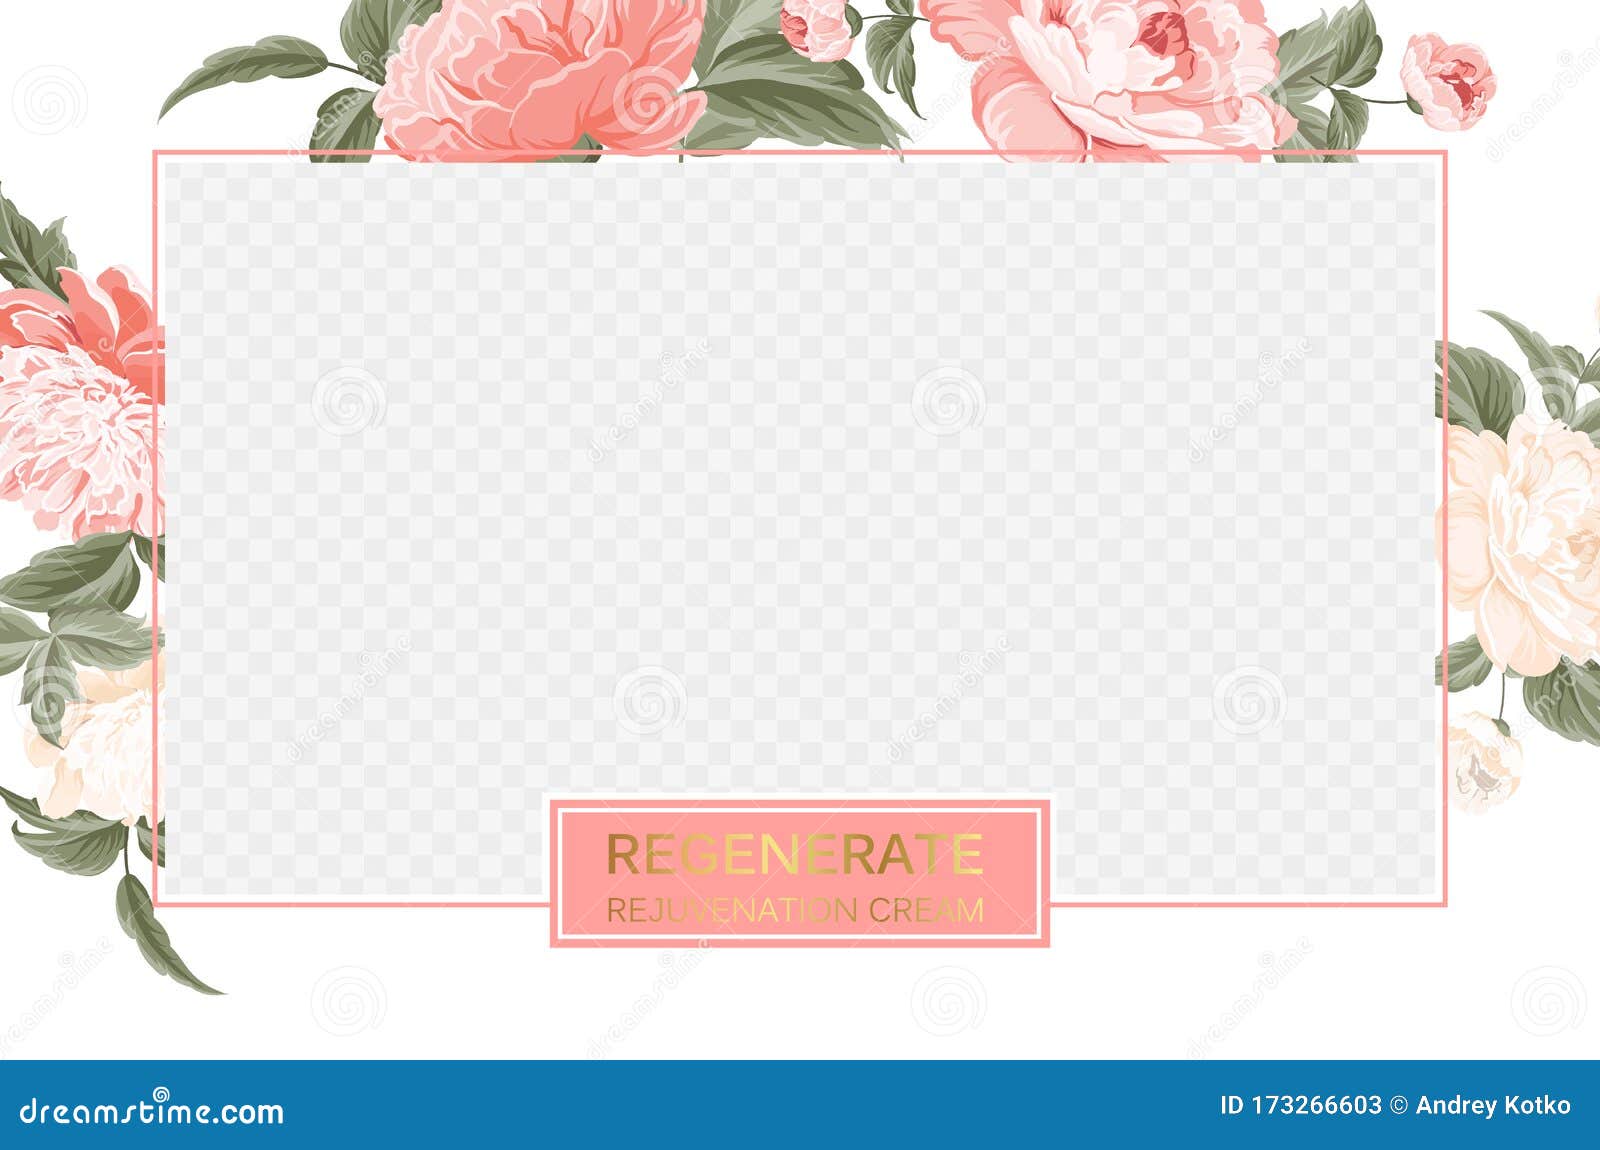 cover , transparent product package window, and peony flower border. regenerate cream label  with pink peony